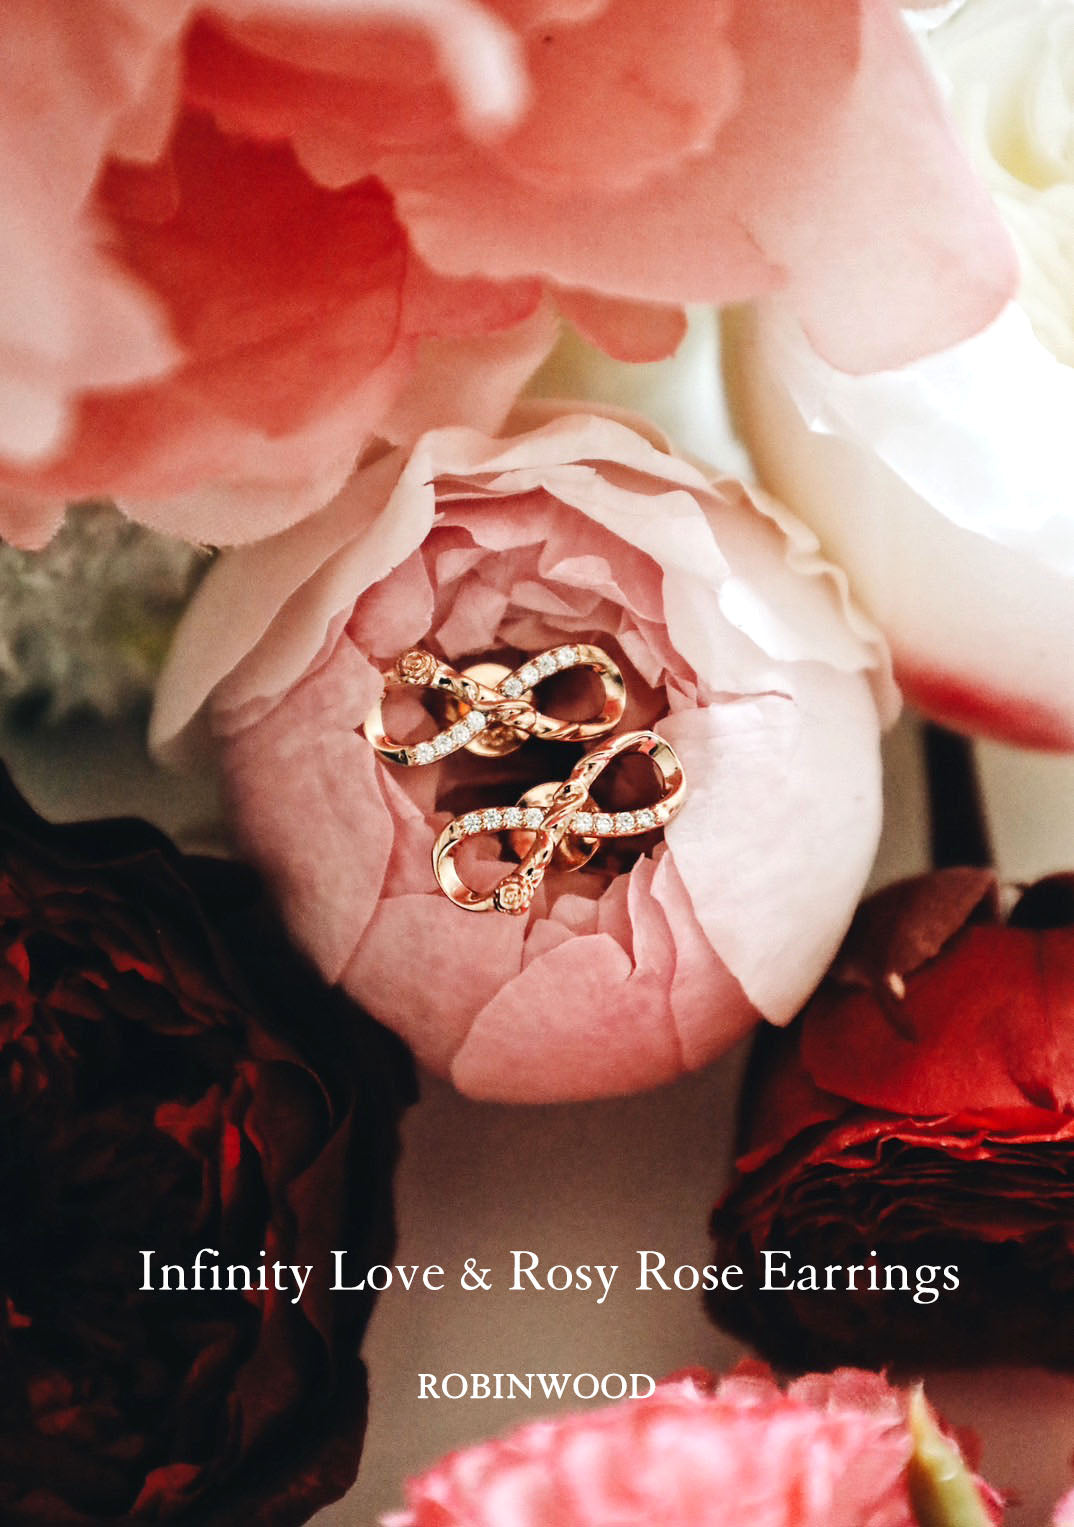 LIMITED VALENTINE COLLECTION'S " INFINITY LOVE & ROSY ROSE Earrings, Robinwood Masterpieces